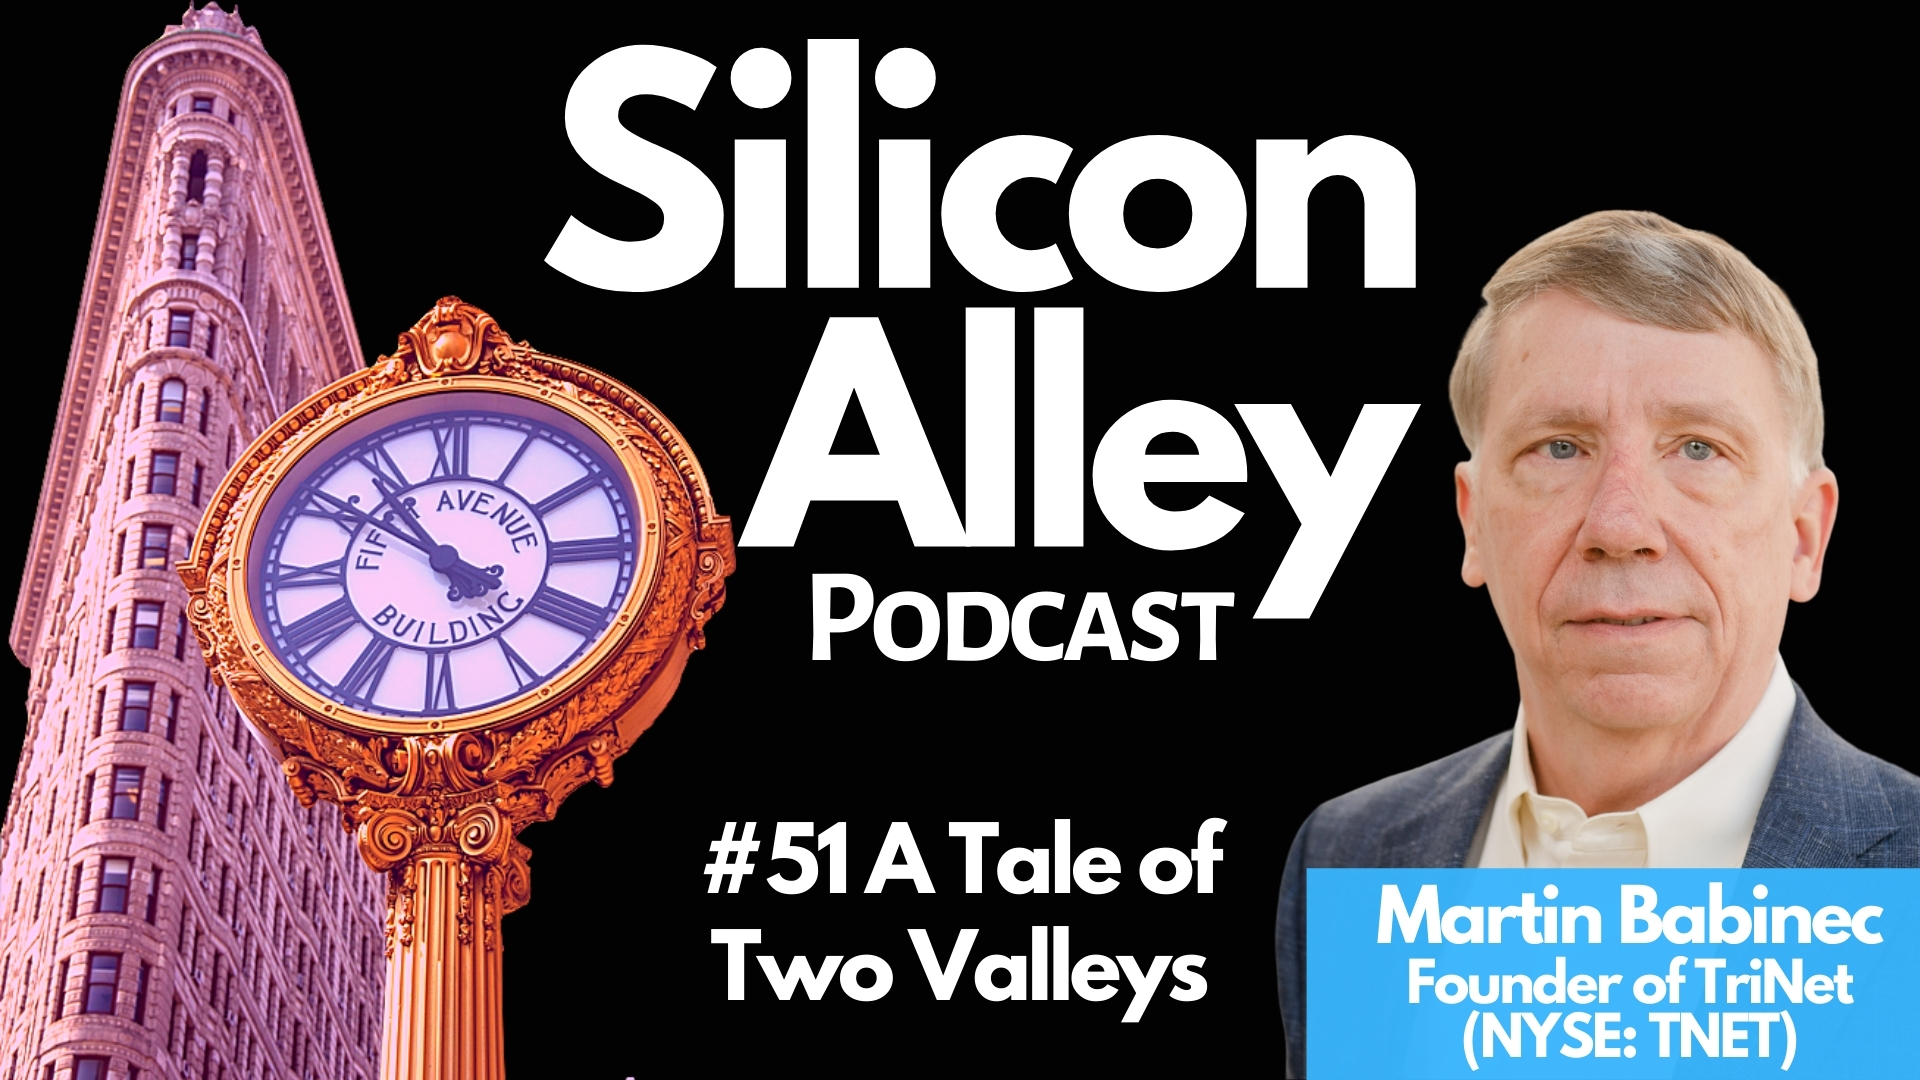 A Tale of Two Valleys with Martin Babinec Founder of TriNet (NYSE: TNET) & Author of More Good Jobs| Silicon Alley Podcast